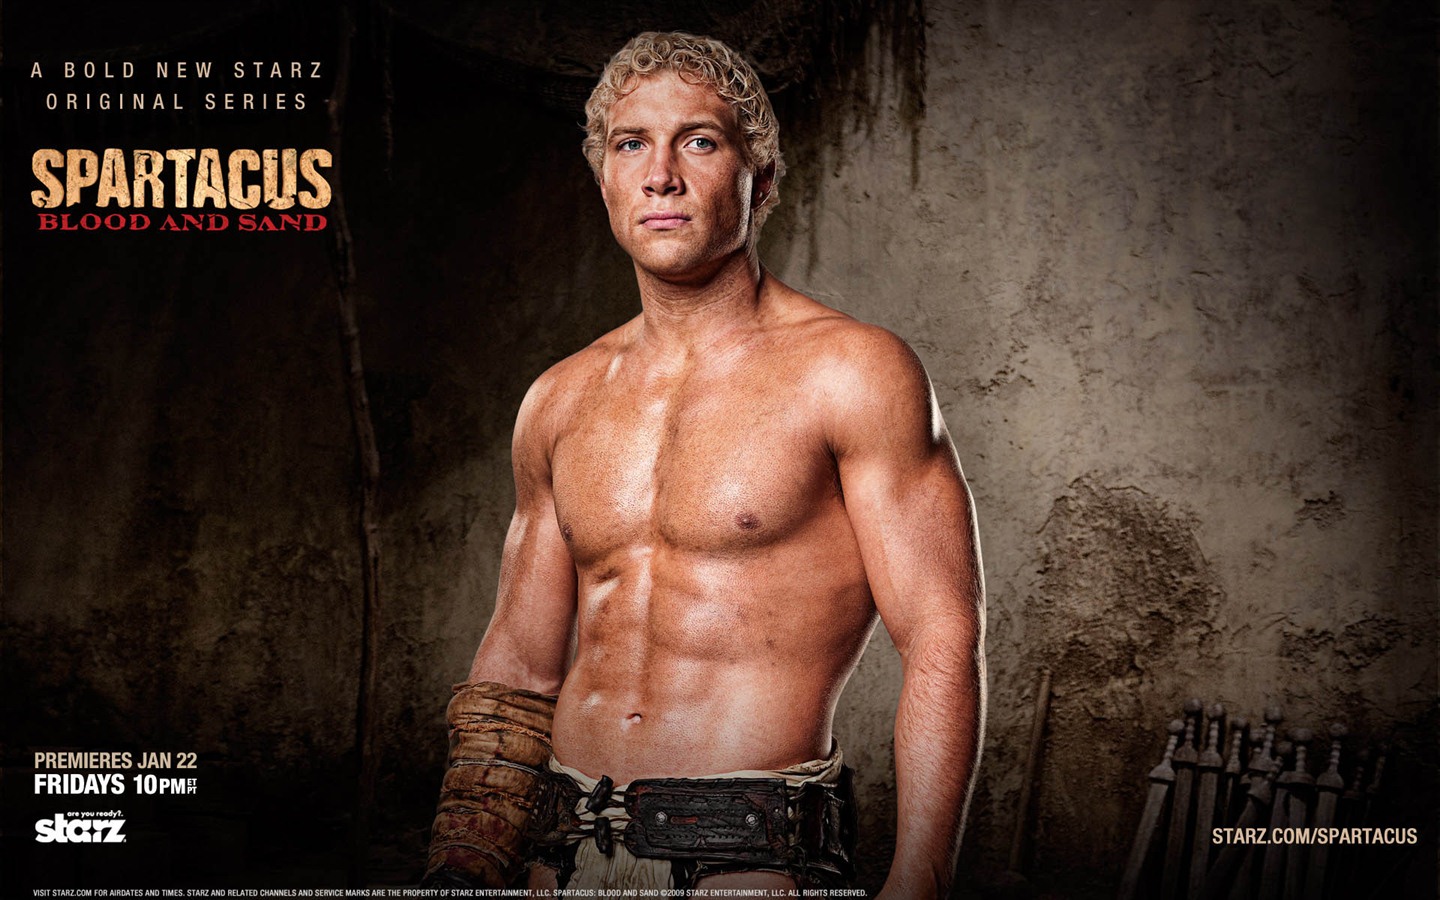 Spartacus: Blood and Sand HD Wallpaper #2 - 1440x900